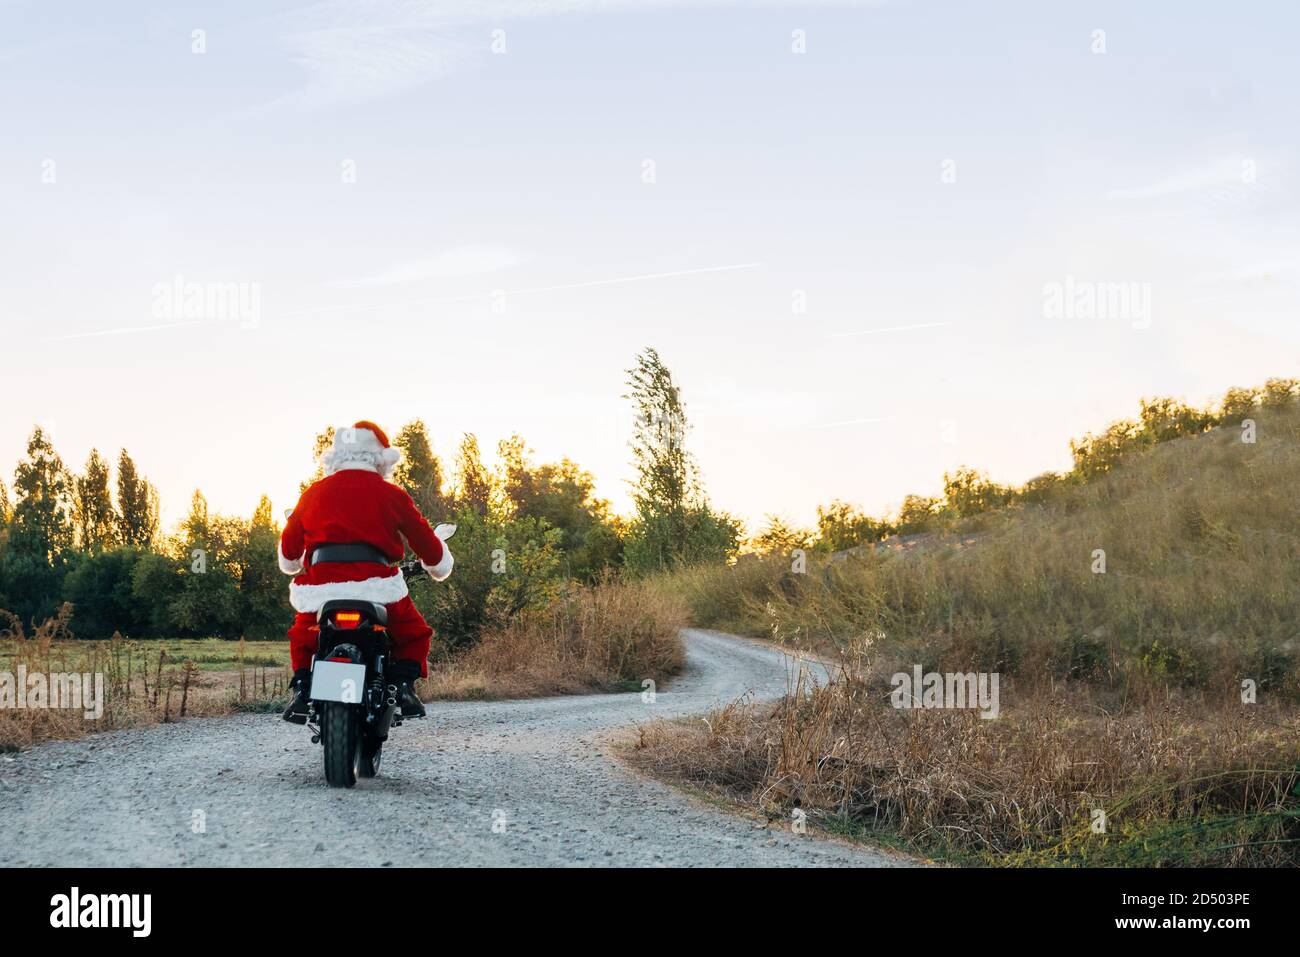 santa claus riding a motorcycle on the road. Stock Photo